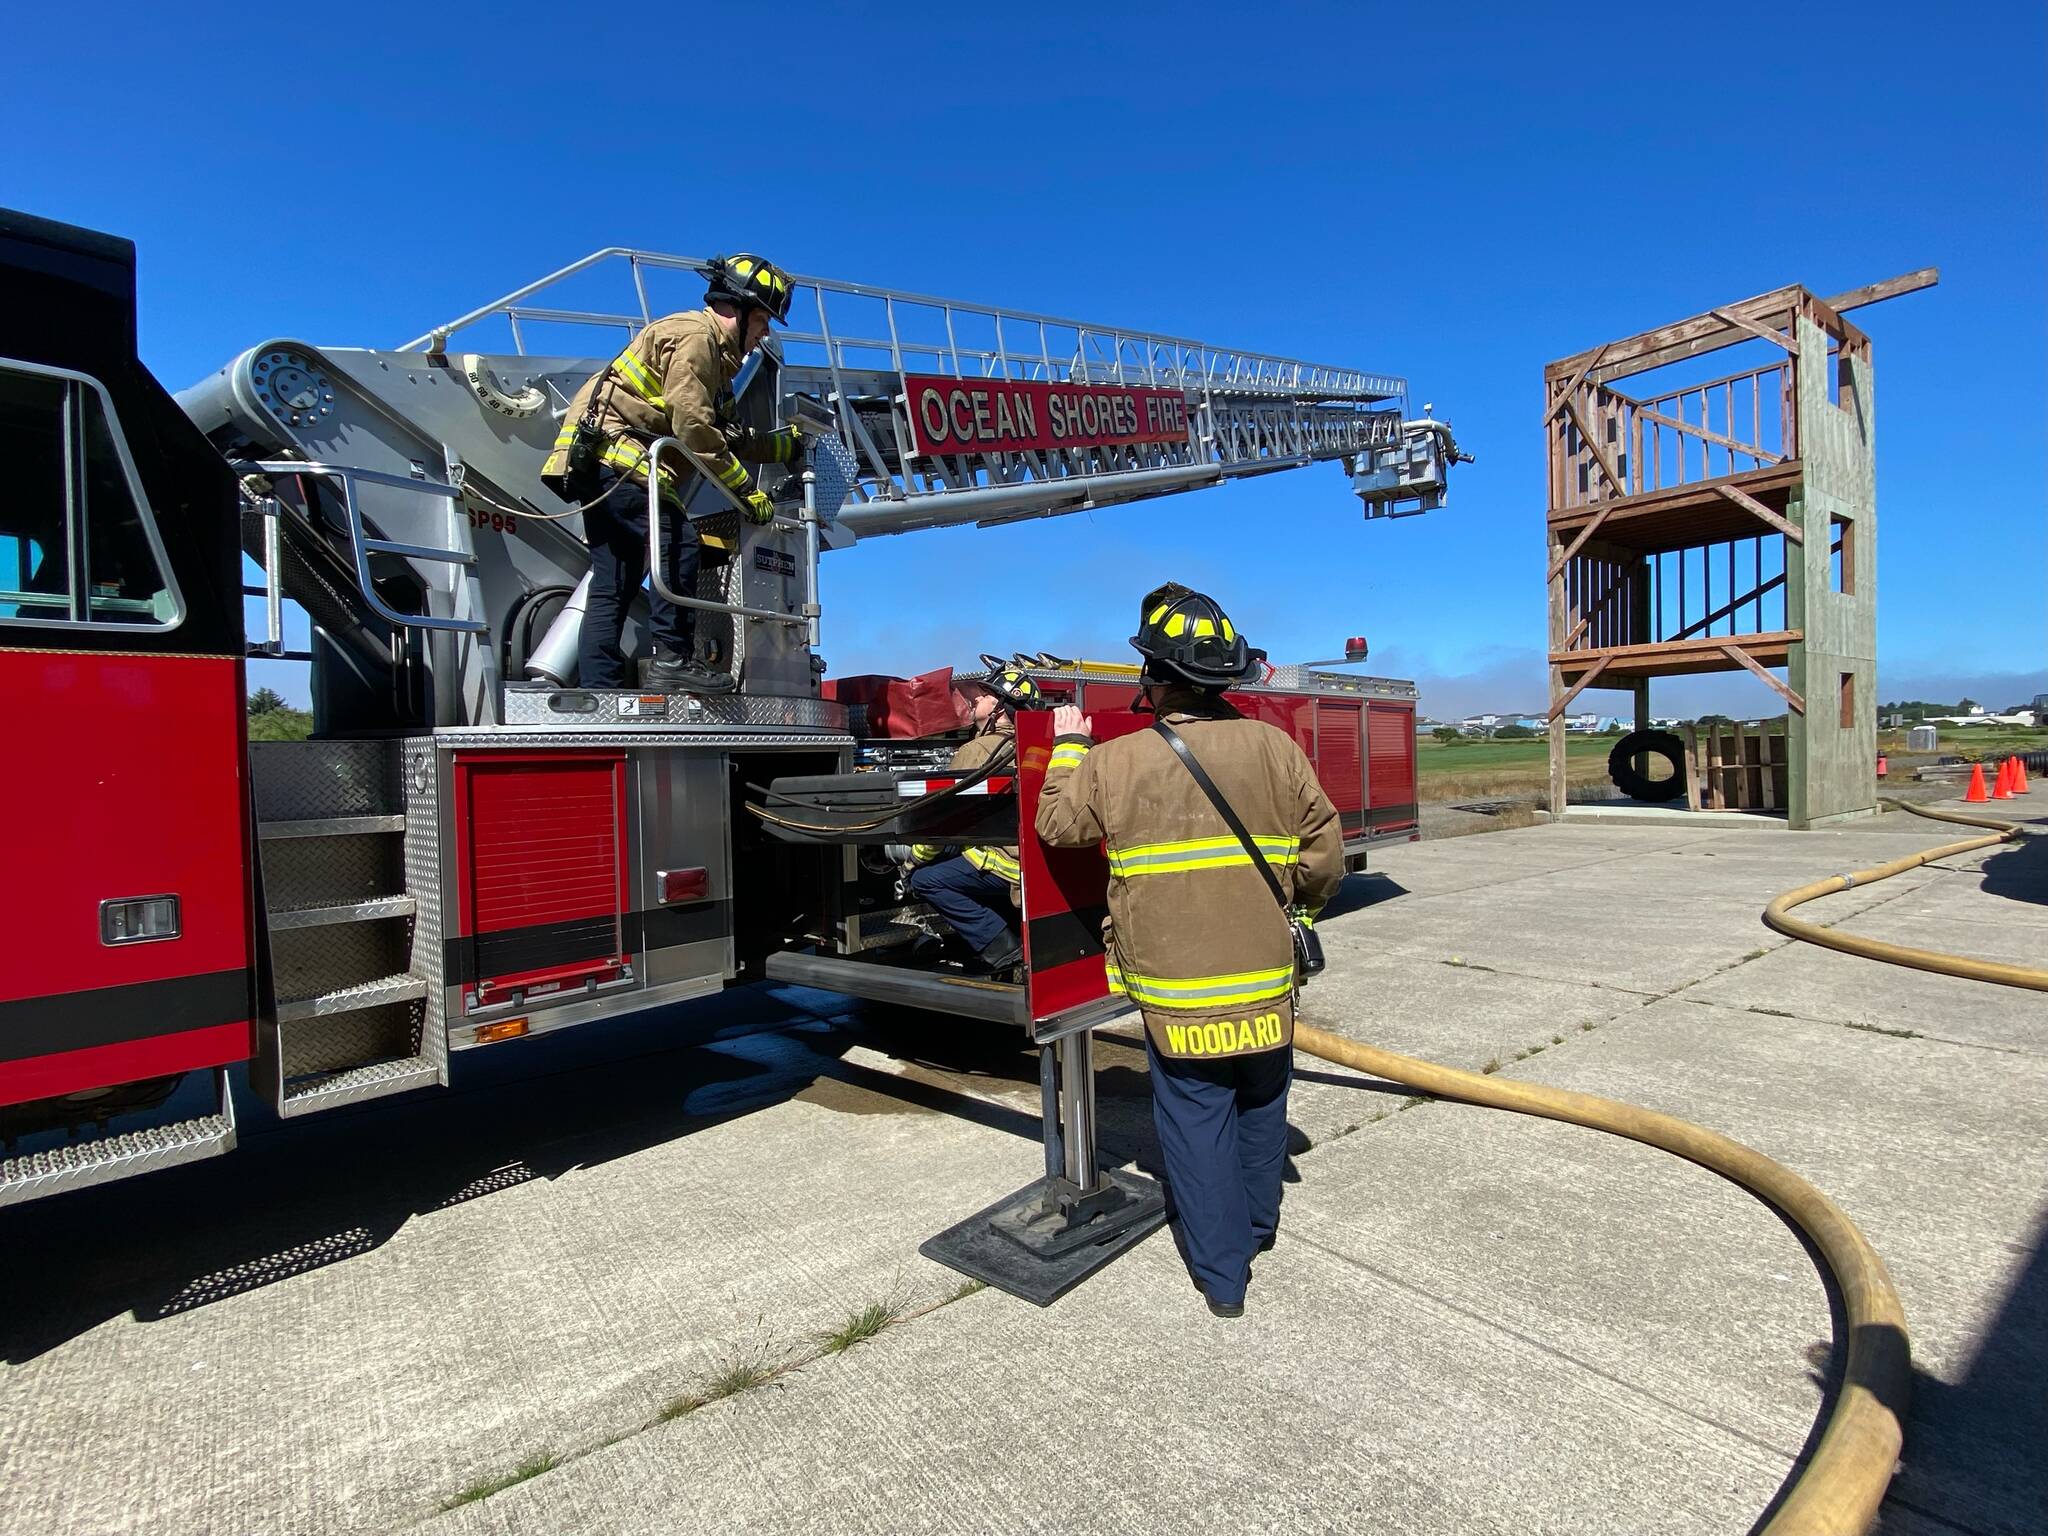 Members of the Ocean Shores Fire Department carry out a training exercise. The department is currently experiencing an issue getting funding for more staffing, even as call volume appears to be headed in one direction. (IAFF Local 2109 / Kara McDermott)